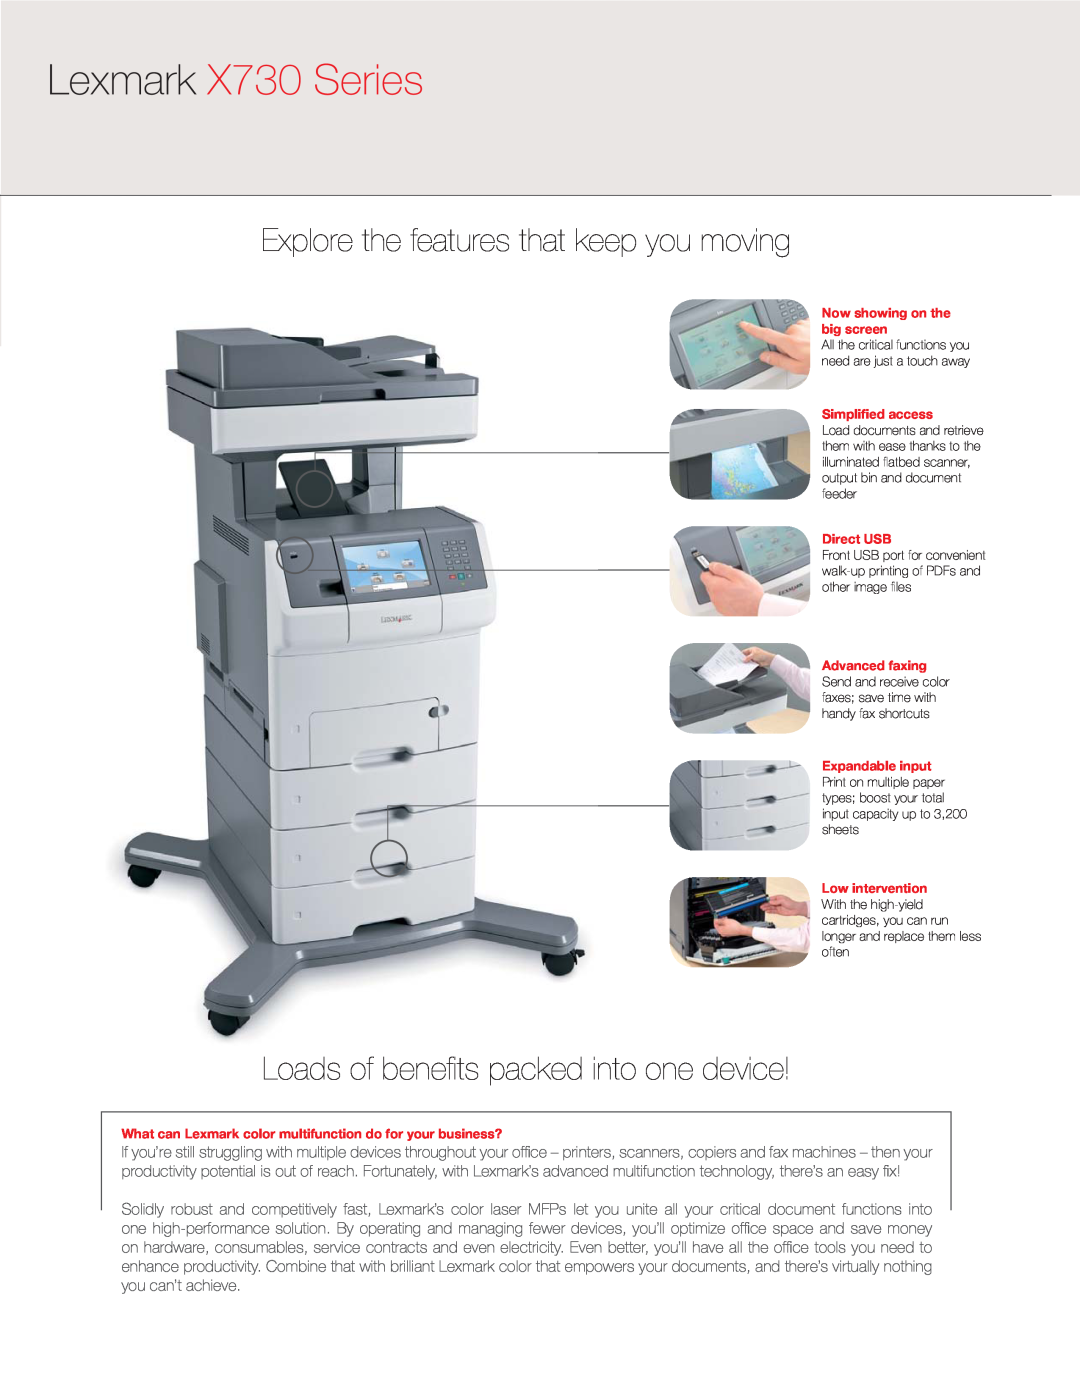 Lexmark manual Explore the features that keep you moving, Loads of beneﬁts packed into one device, Lexmark X730 Series 